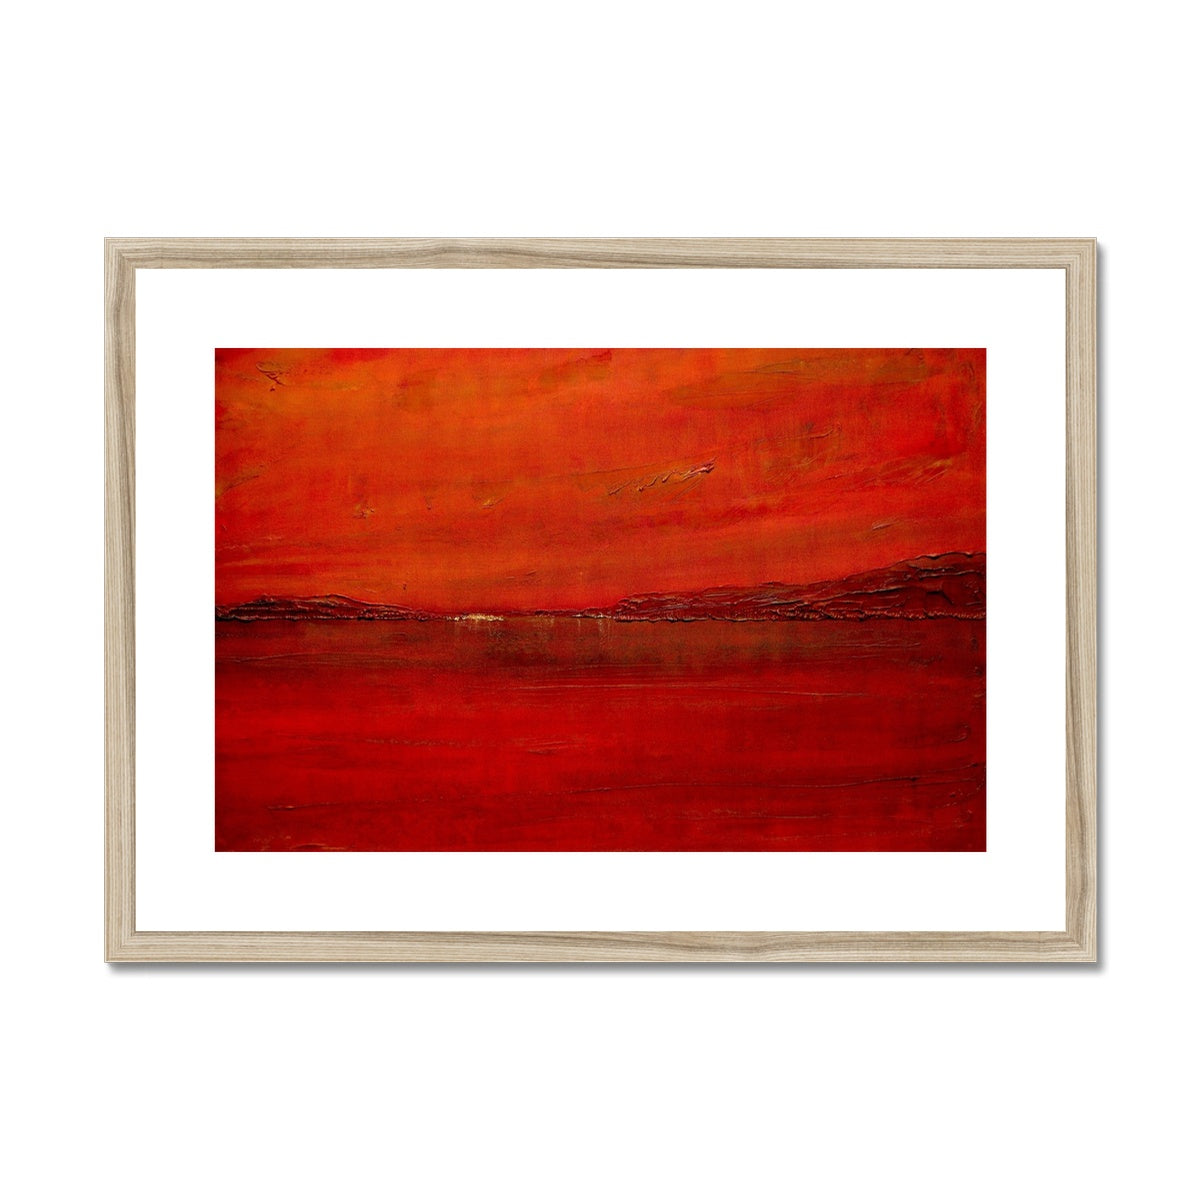 Deep Loch Lomond Sunset Painting | Framed & Mounted Prints From Scotland-Framed & Mounted Prints-Scottish Lochs & Mountains Art Gallery-A2 Landscape-Natural Frame-Paintings, Prints, Homeware, Art Gifts From Scotland By Scottish Artist Kevin Hunter